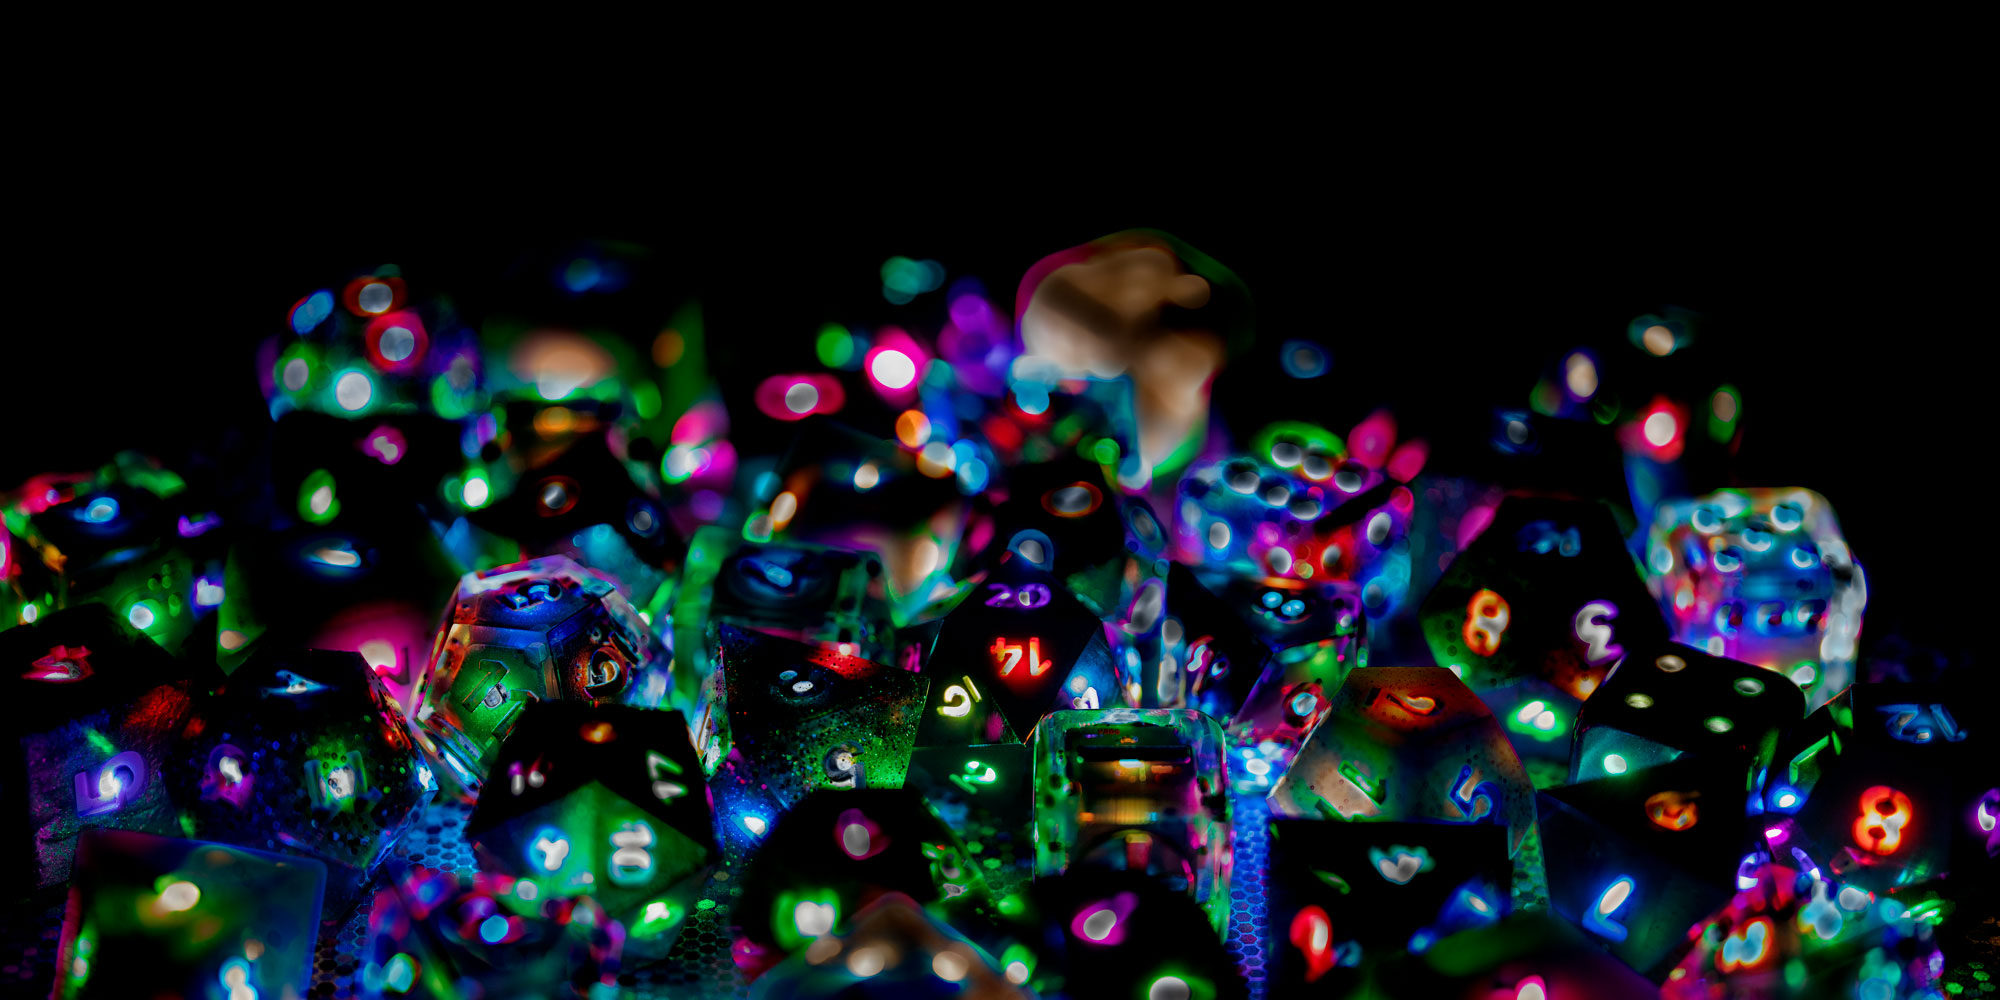 Photograph of a large pile of Pixels Dice in various colorways. All lights are on, shining a bright rainbow of colors through numbers and across faces.